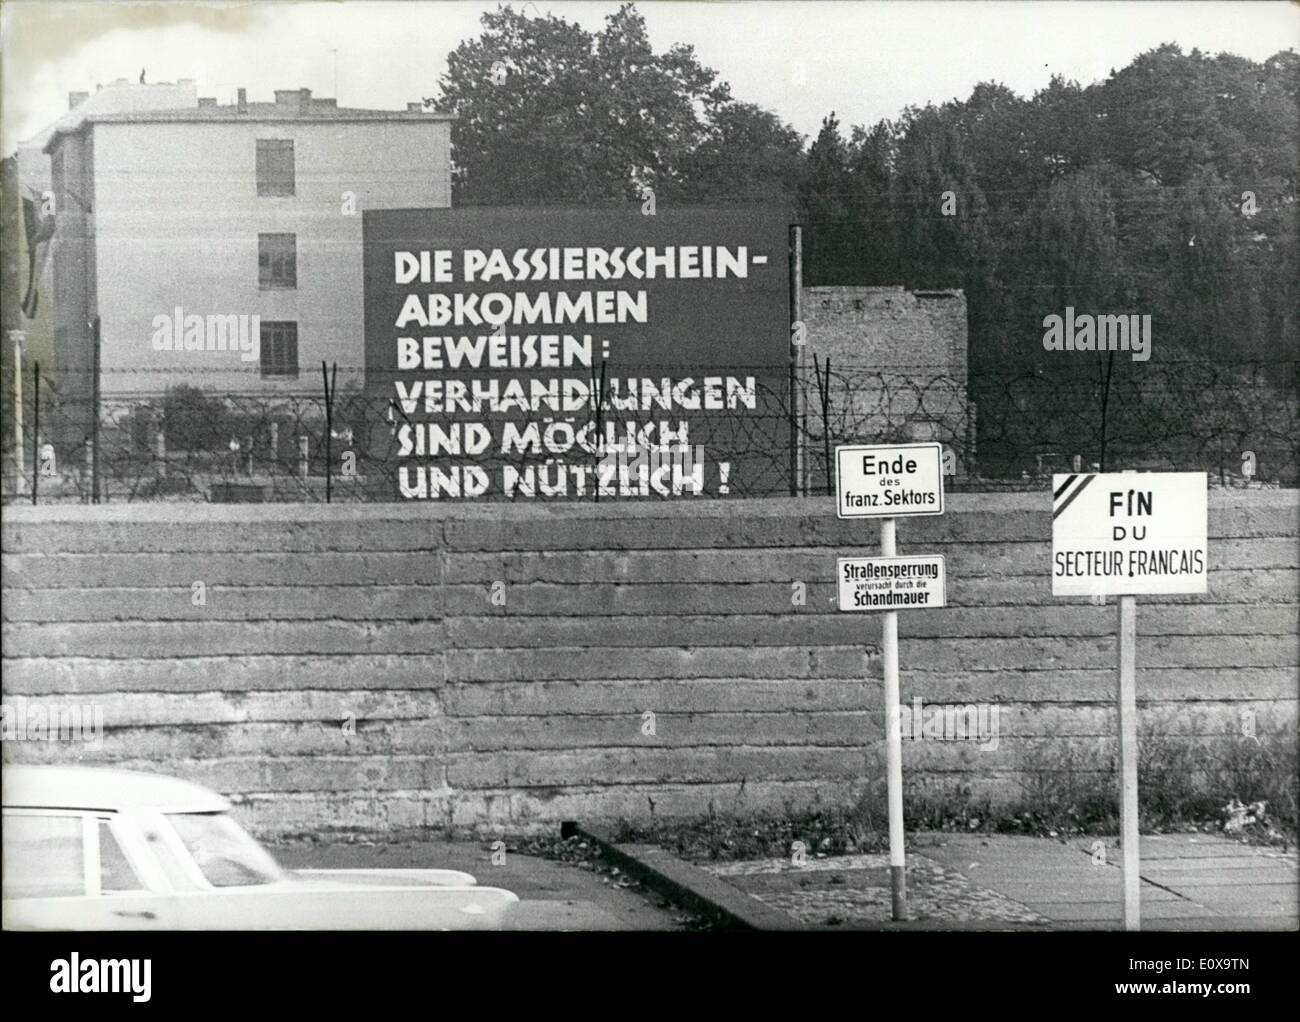 Oct. 10, 1965 - '' Shall this be a joke?.: Ask the inhabitants and visitors of West-Berlin who see this placard on the East side of the Bernauer street, which pillories discussions between East and West as possible and useful. Either are they not up-to-date behind the barbed-wire or perhaps beforehand; but it might not be right that the East-Berlin authorities only forgot to put aside this most promising table after the stop of the permit-discussions. Stock Photo